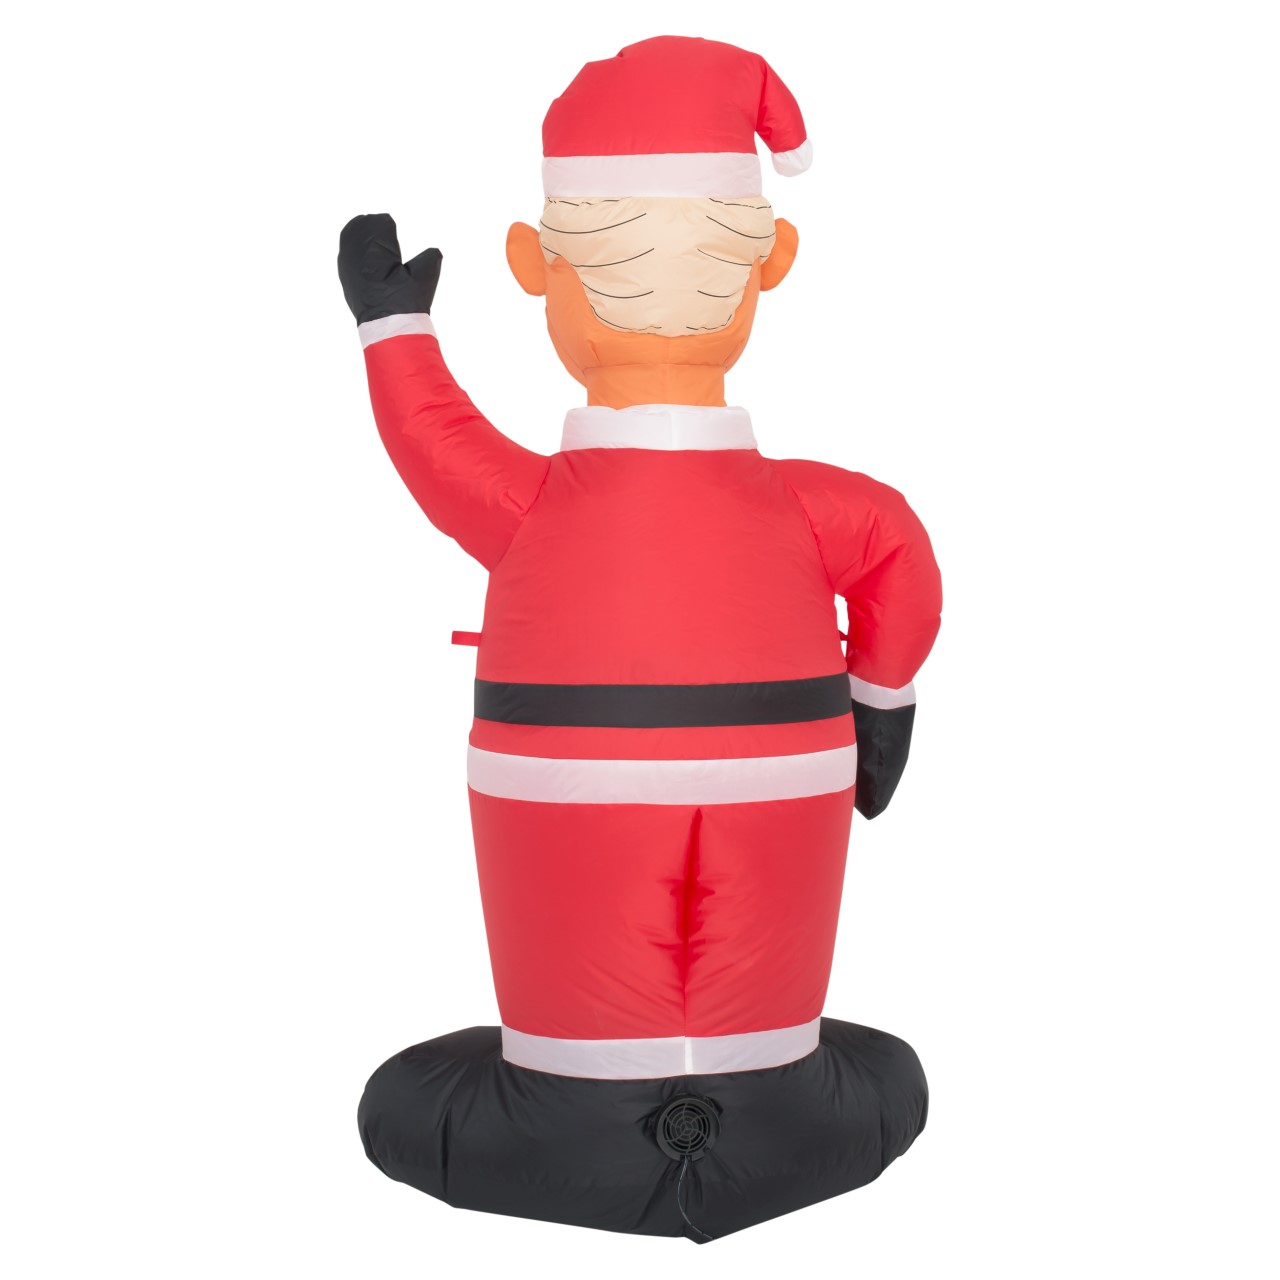 Donald Trump Make Christmas Great Again Lawn Inflatable